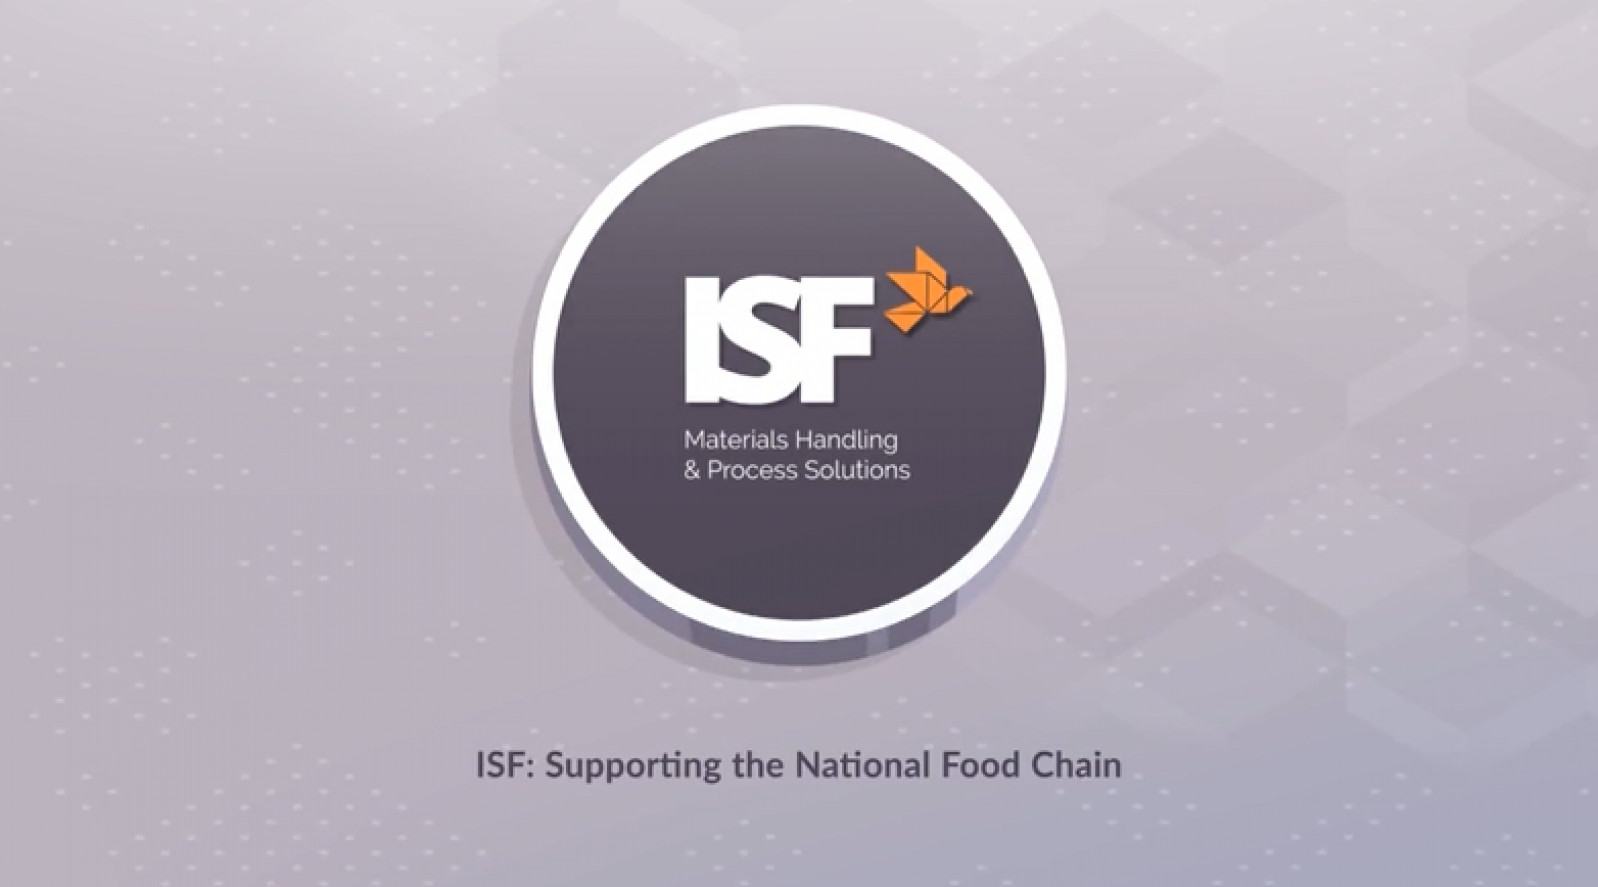 THE PART ISF PLAYS IN THE NATIONAL FOOD CHAIN